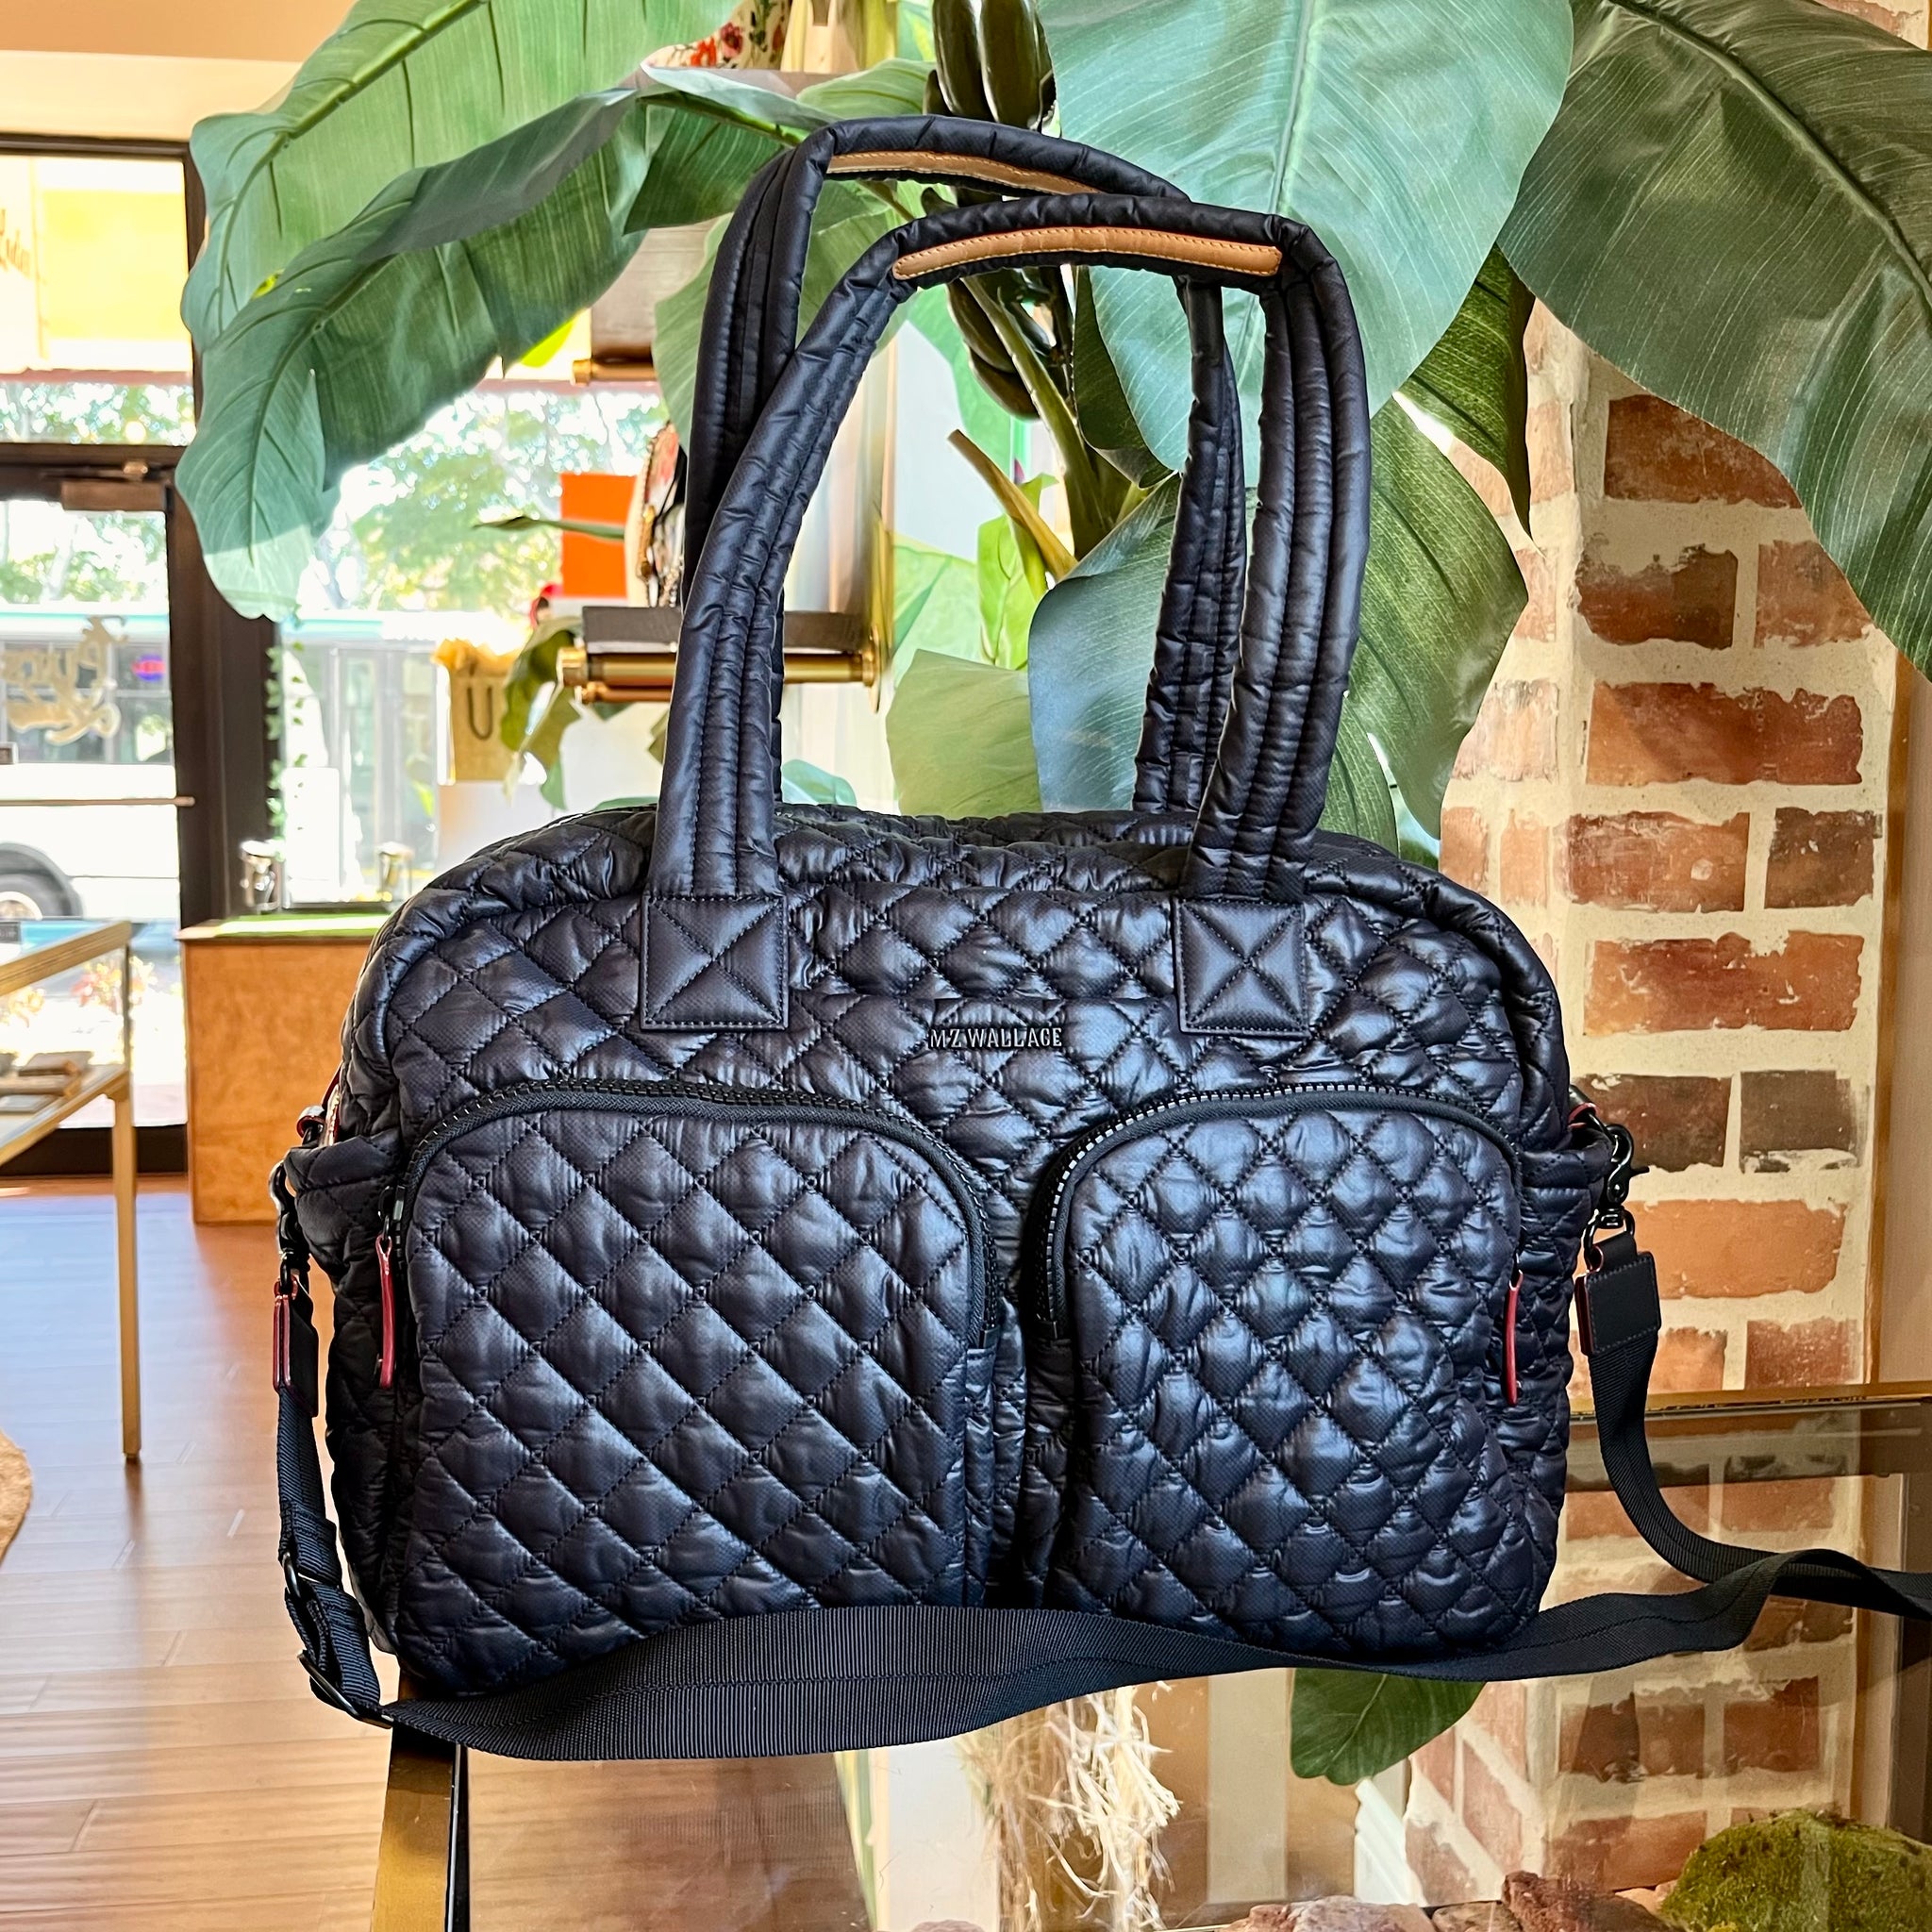 MZ WALLACE Black Quilted Nylon Travel Bag - The Purse Ladies